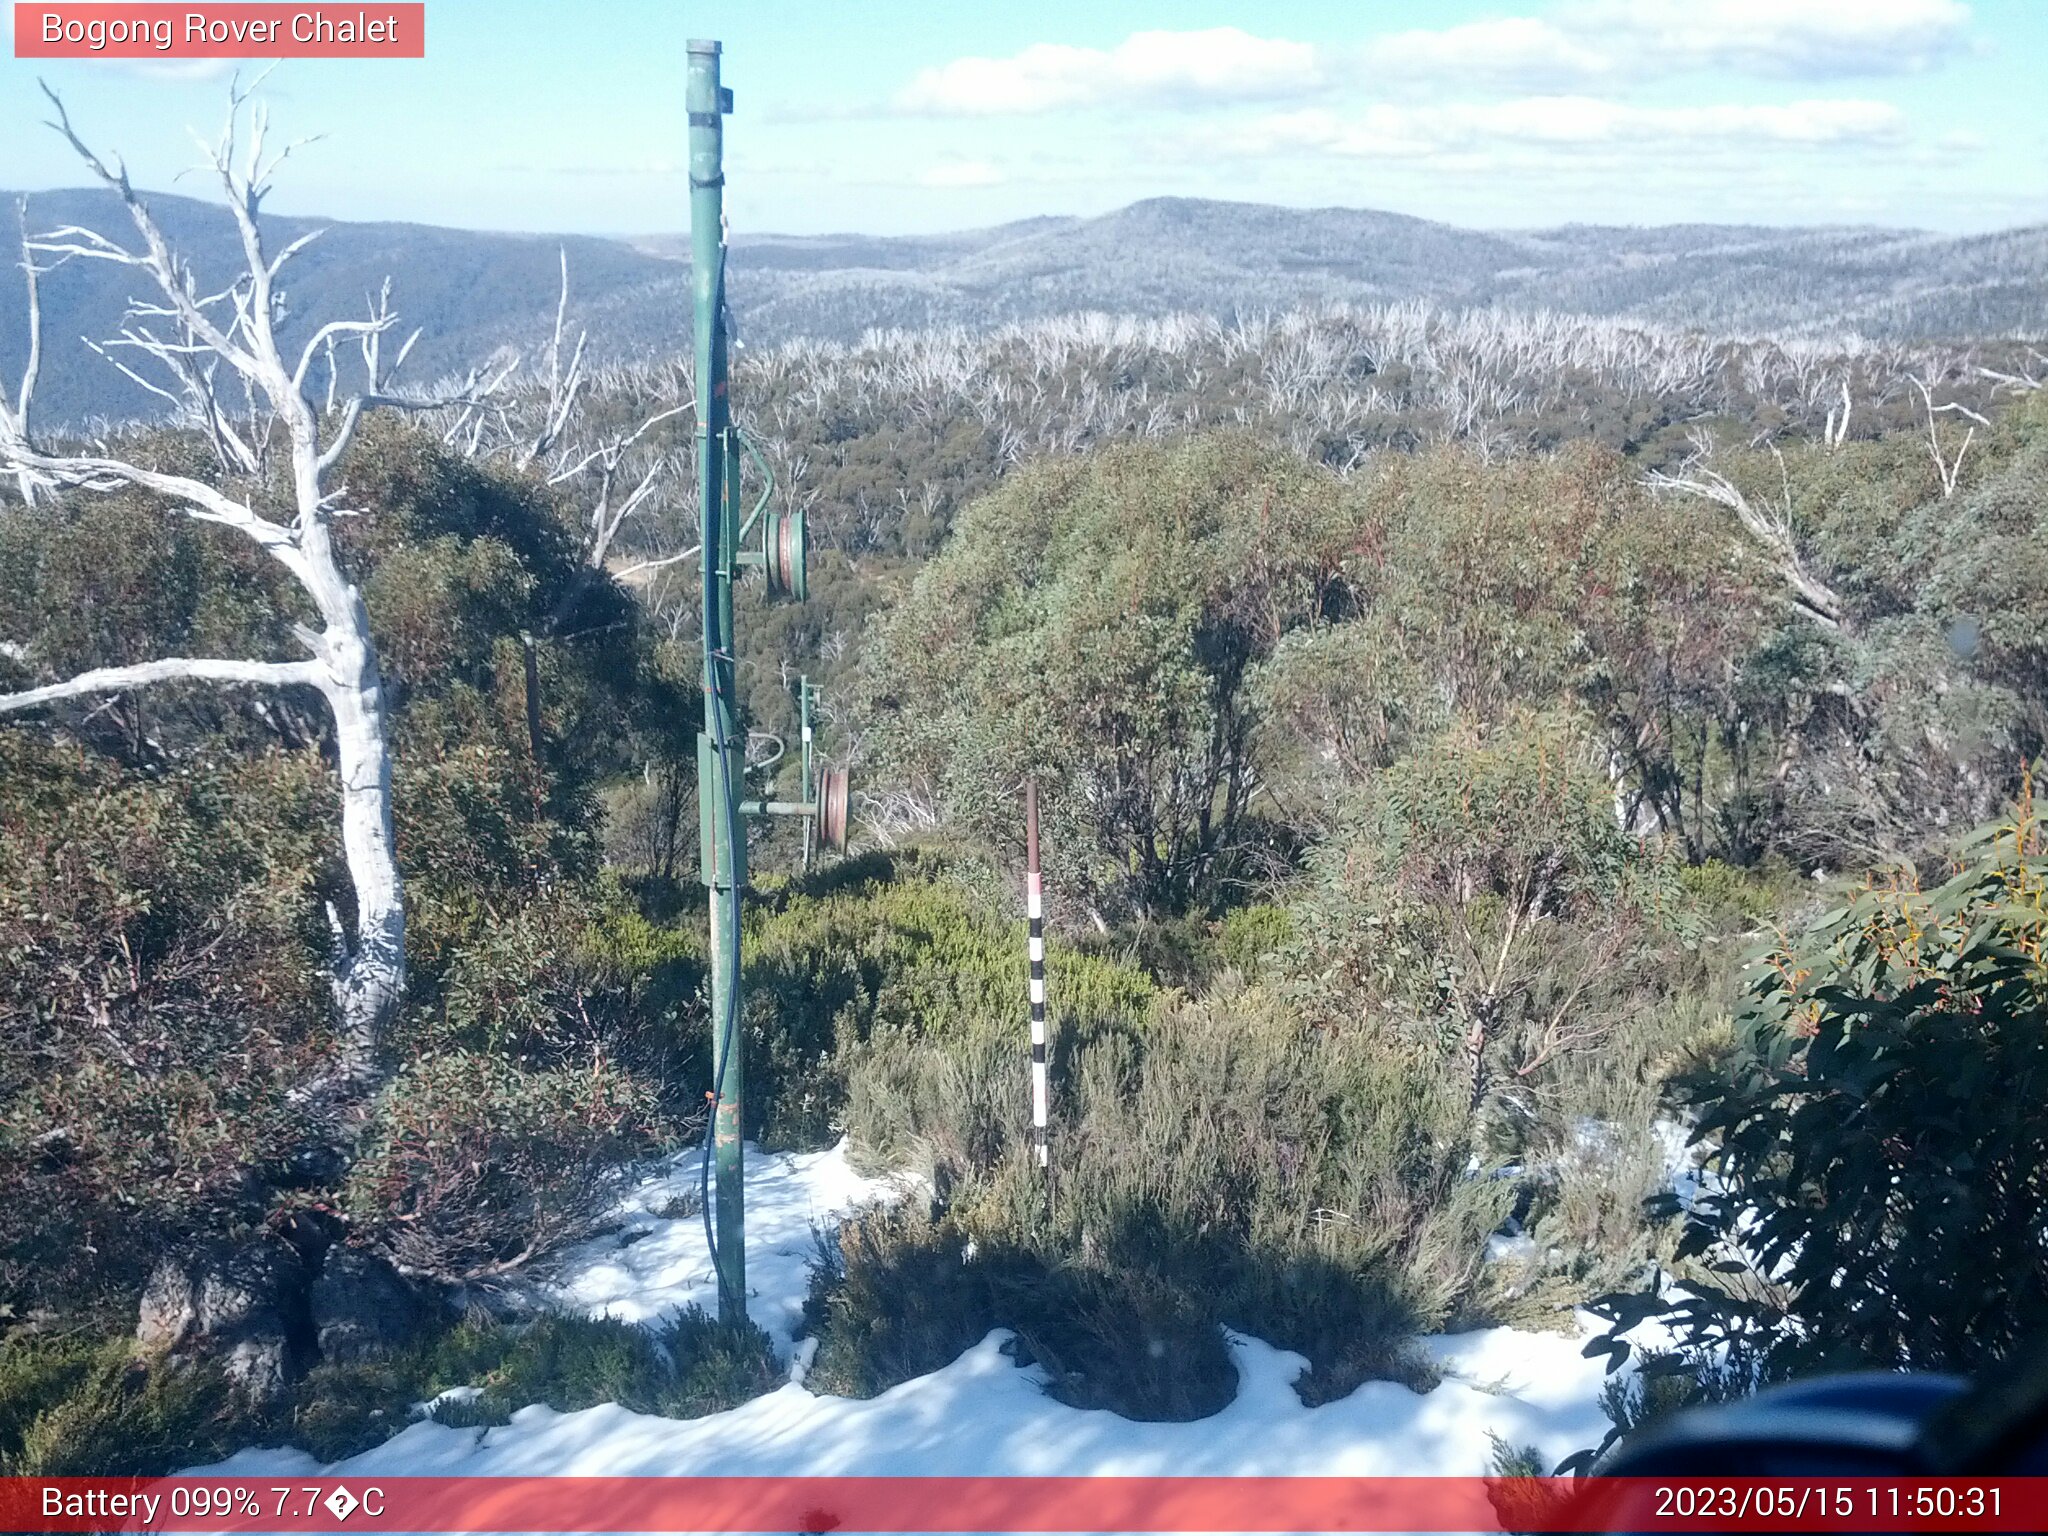 Bogong Web Cam 11:50am Monday 15th of May 2023